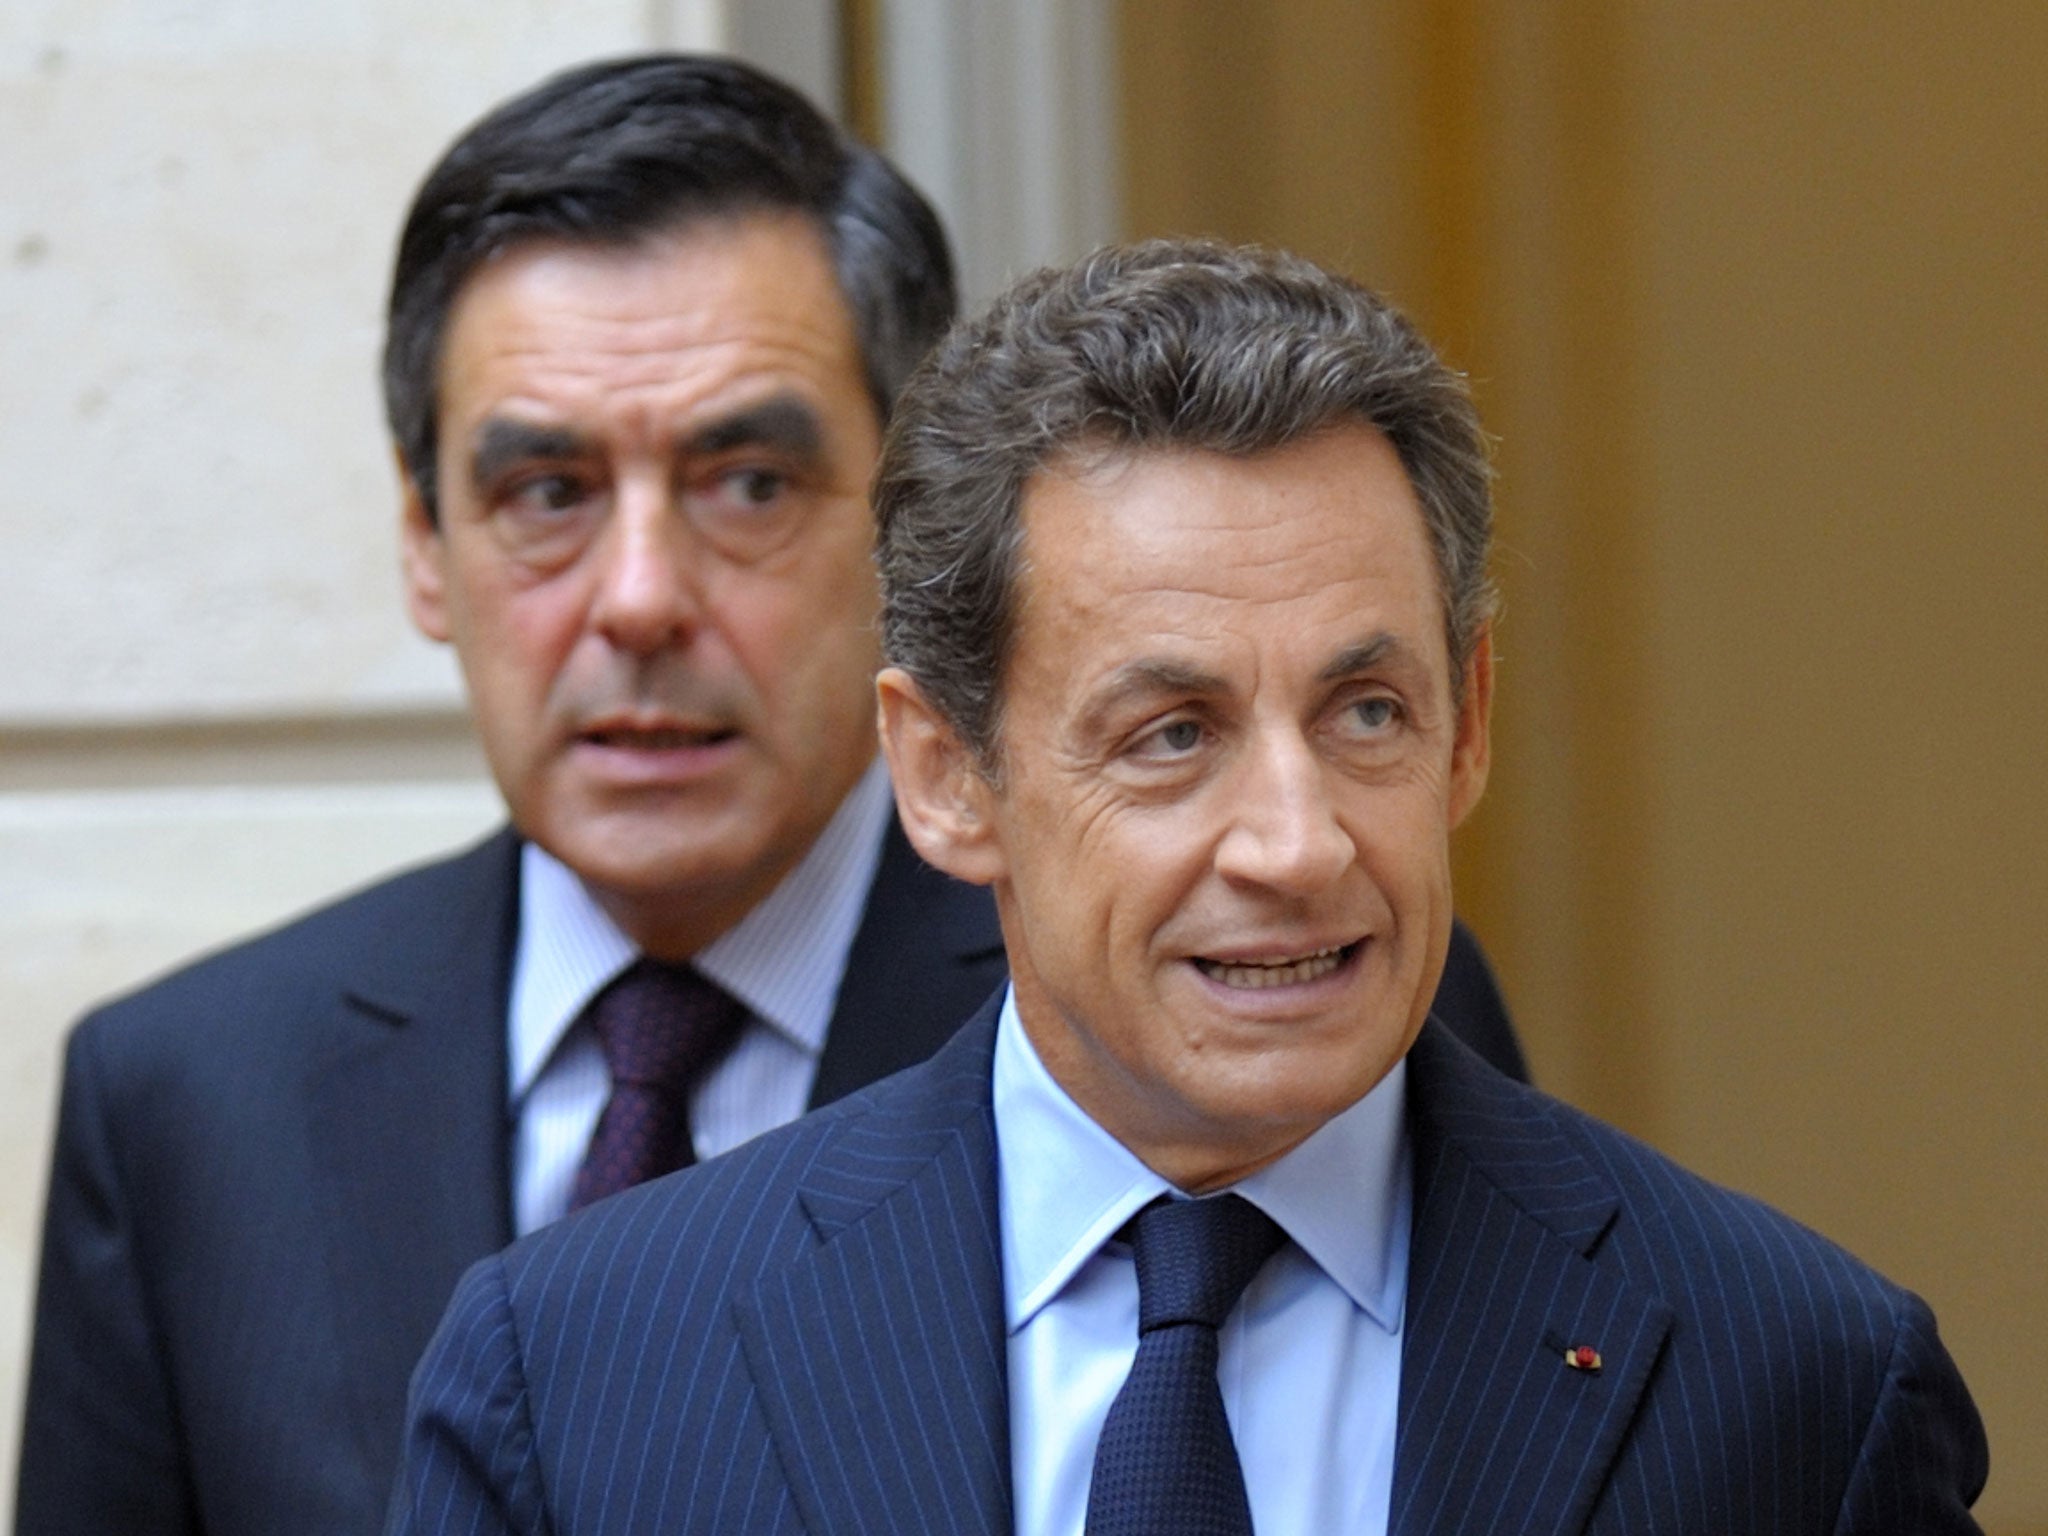 Former Prime Minister François Fillon, left, with Nicolas Sarkozy, accused the aide of lying